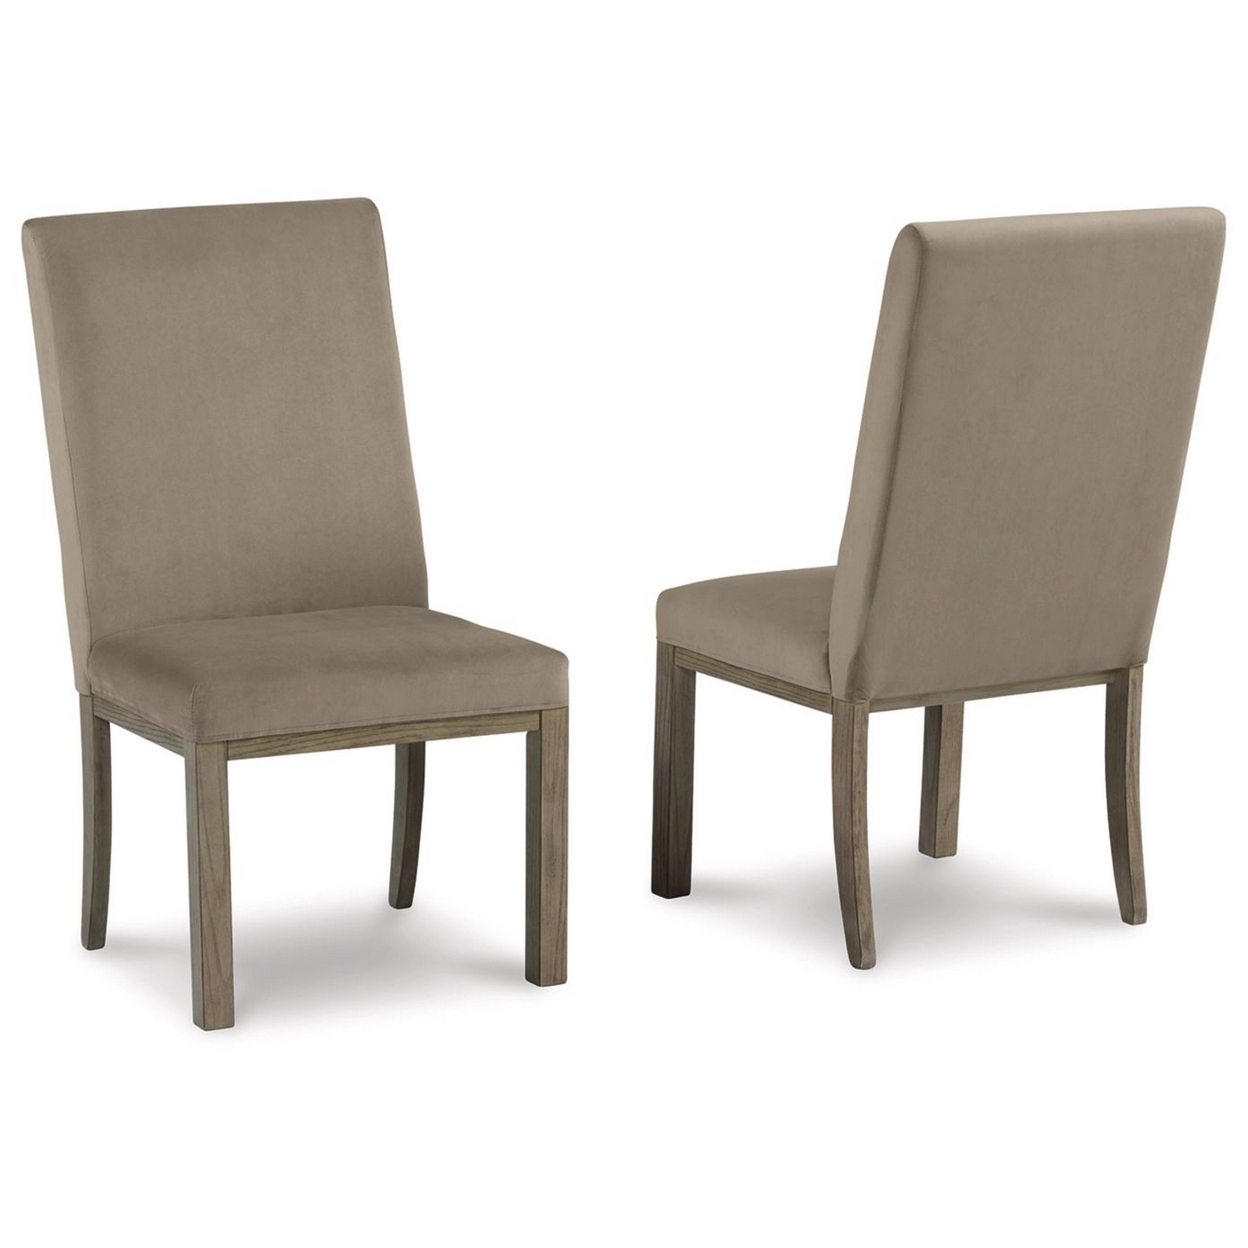 Afu 24 Inch Dining Side Chairs, Set Of 2, Cushioned, Light Brown Upholstery- Saltoro Sherpi